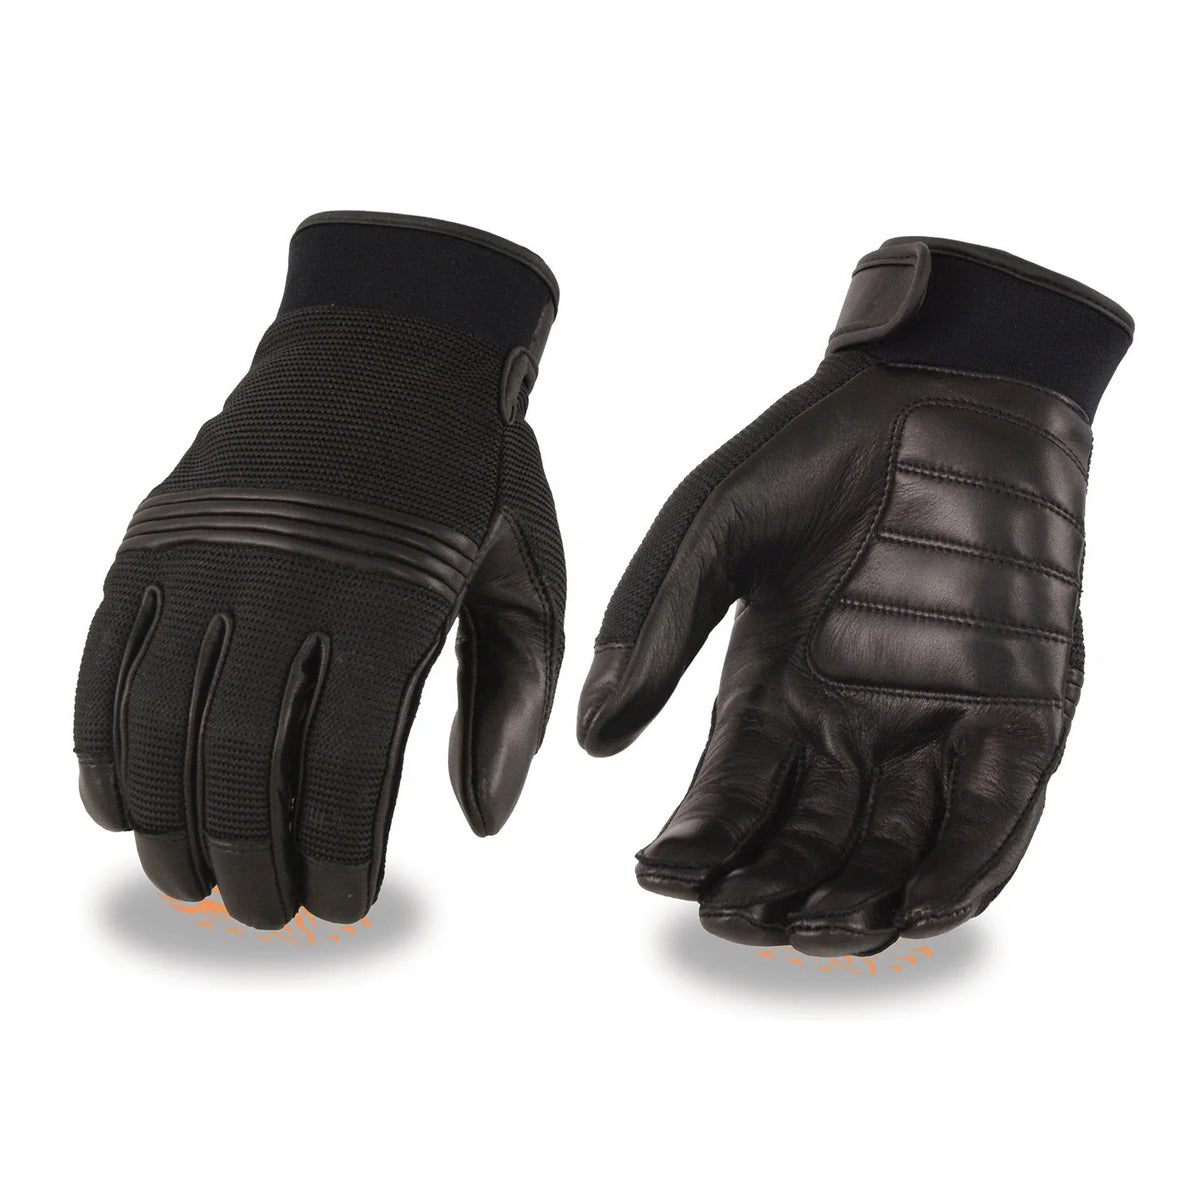 Men's Black Leather Mesh Gel Palm Motorcycle Hand Gloves W/ Rubberized Flex Knuckles 5.0 star rating 1 Review